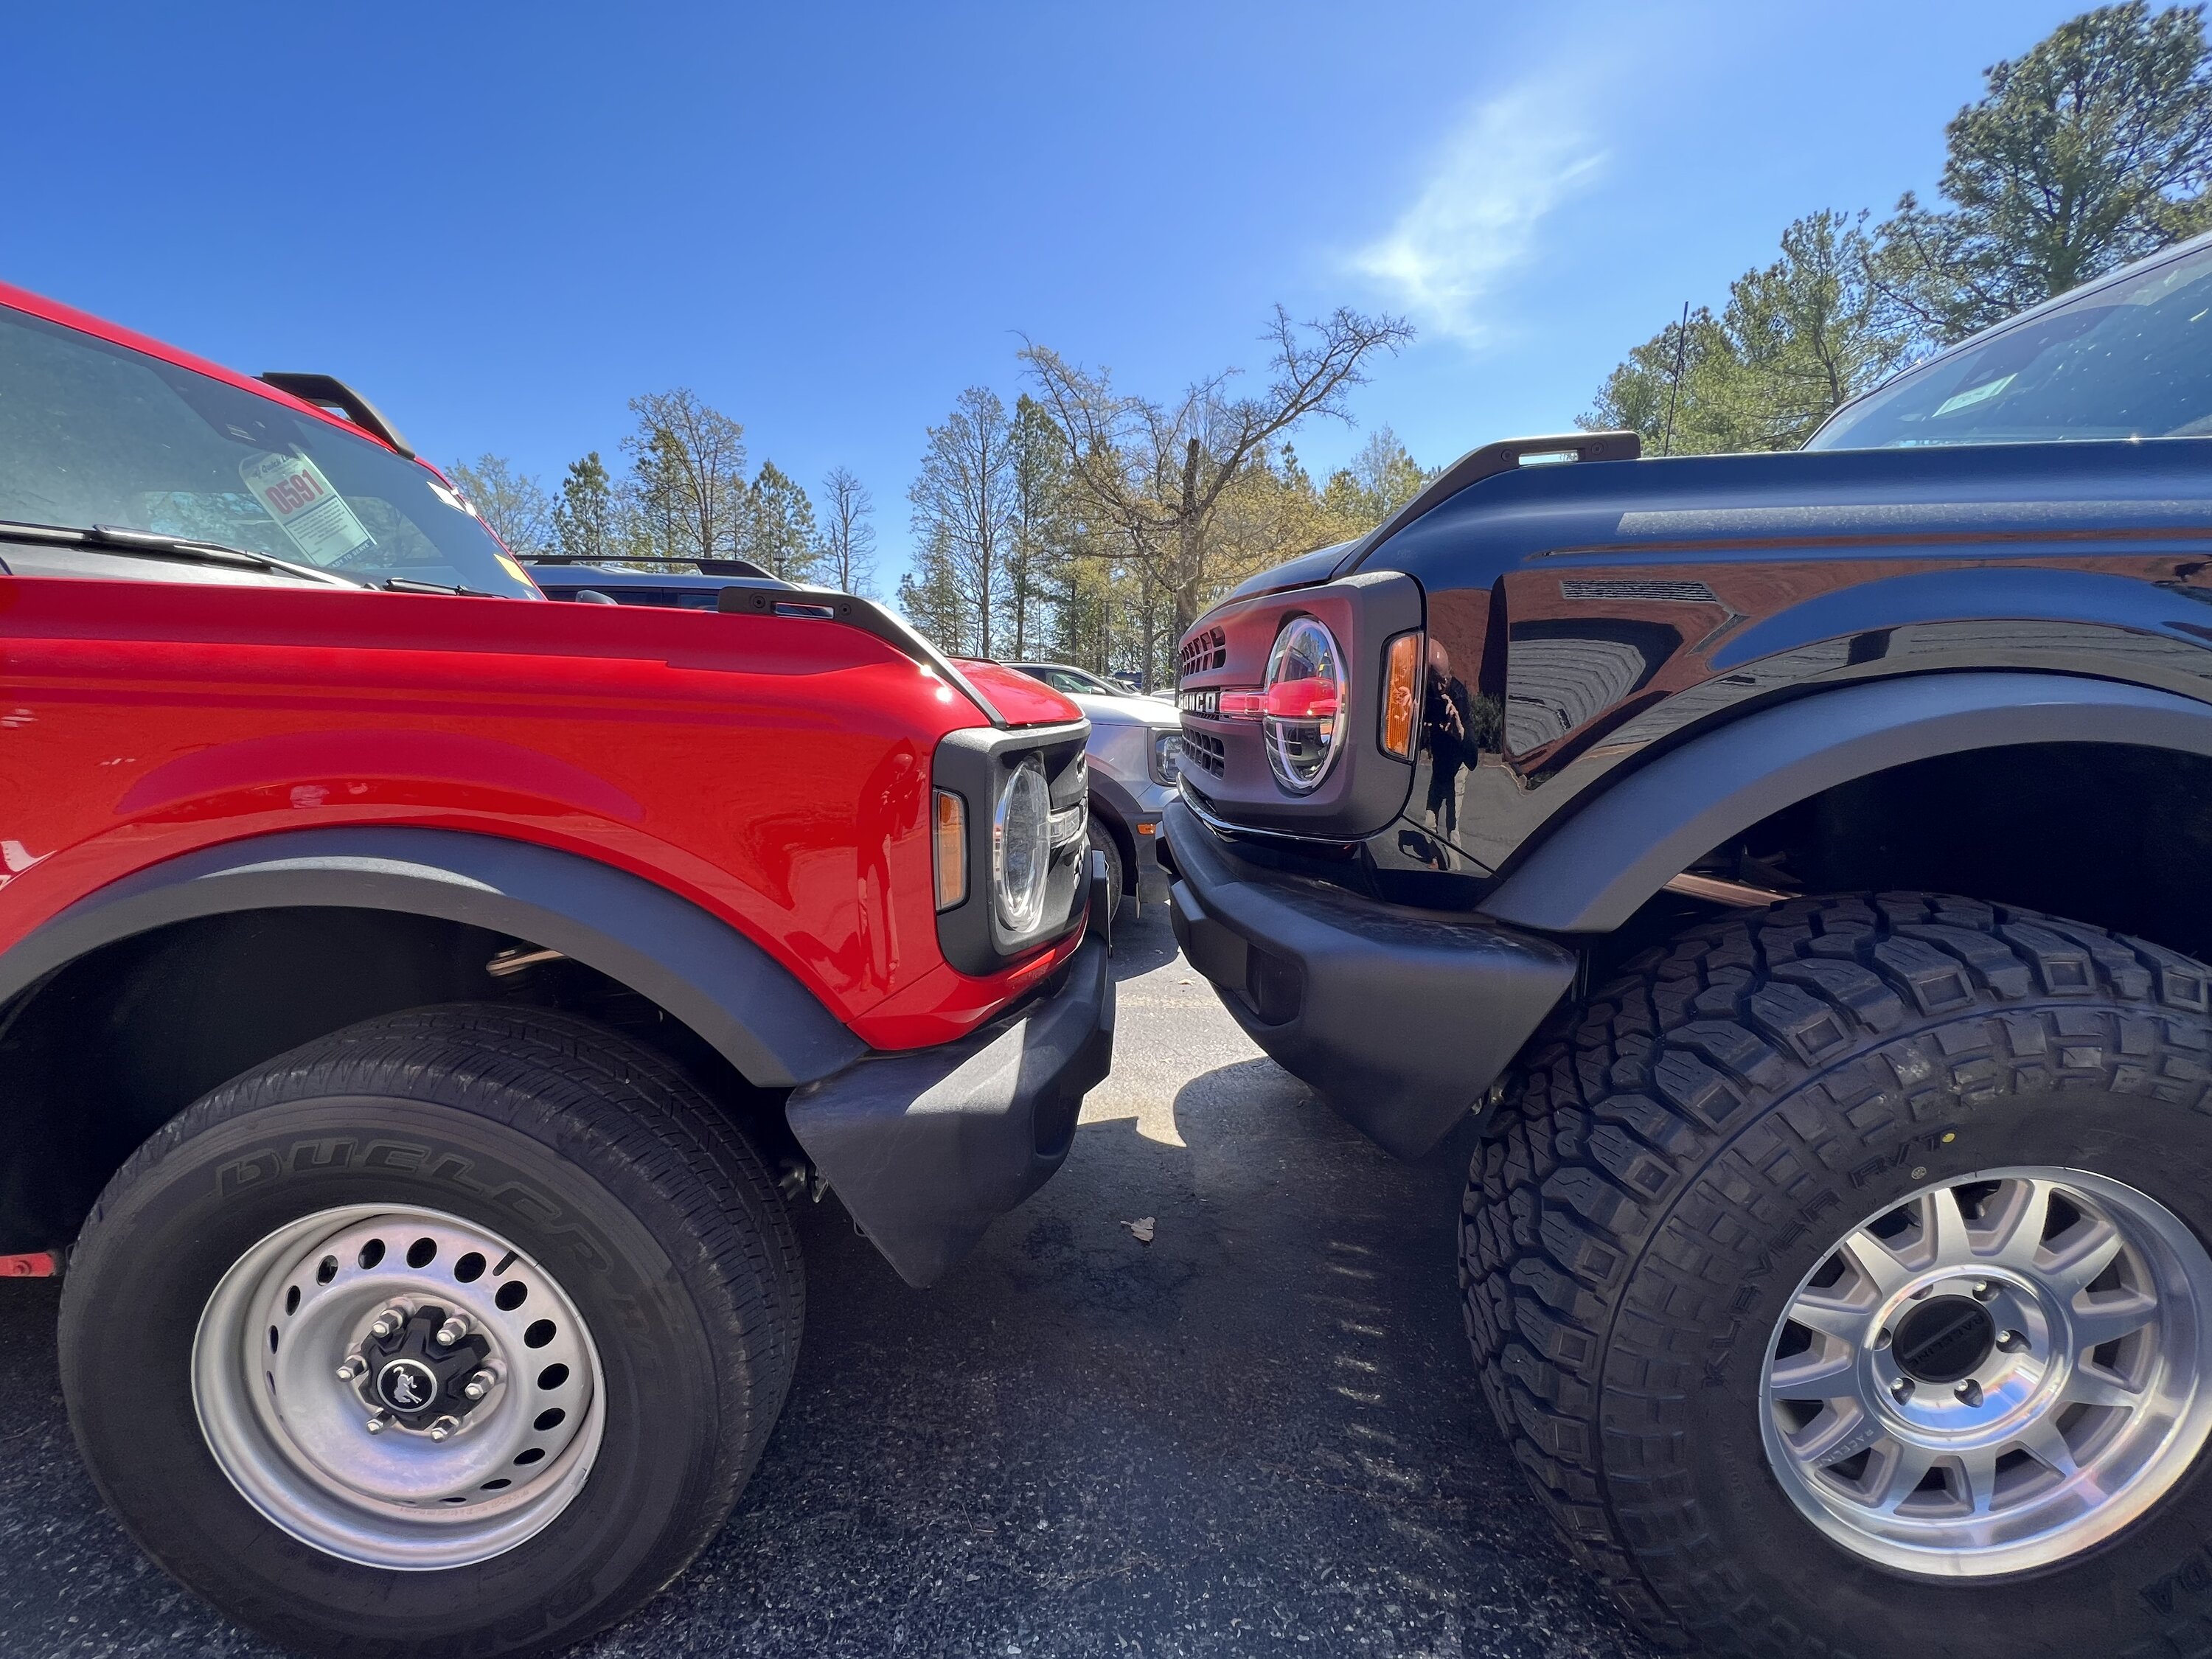 Ford Bronco Before & After (stock 2dr Base vs. 3.5” lift + 37’s). What a difference! IMG_3604